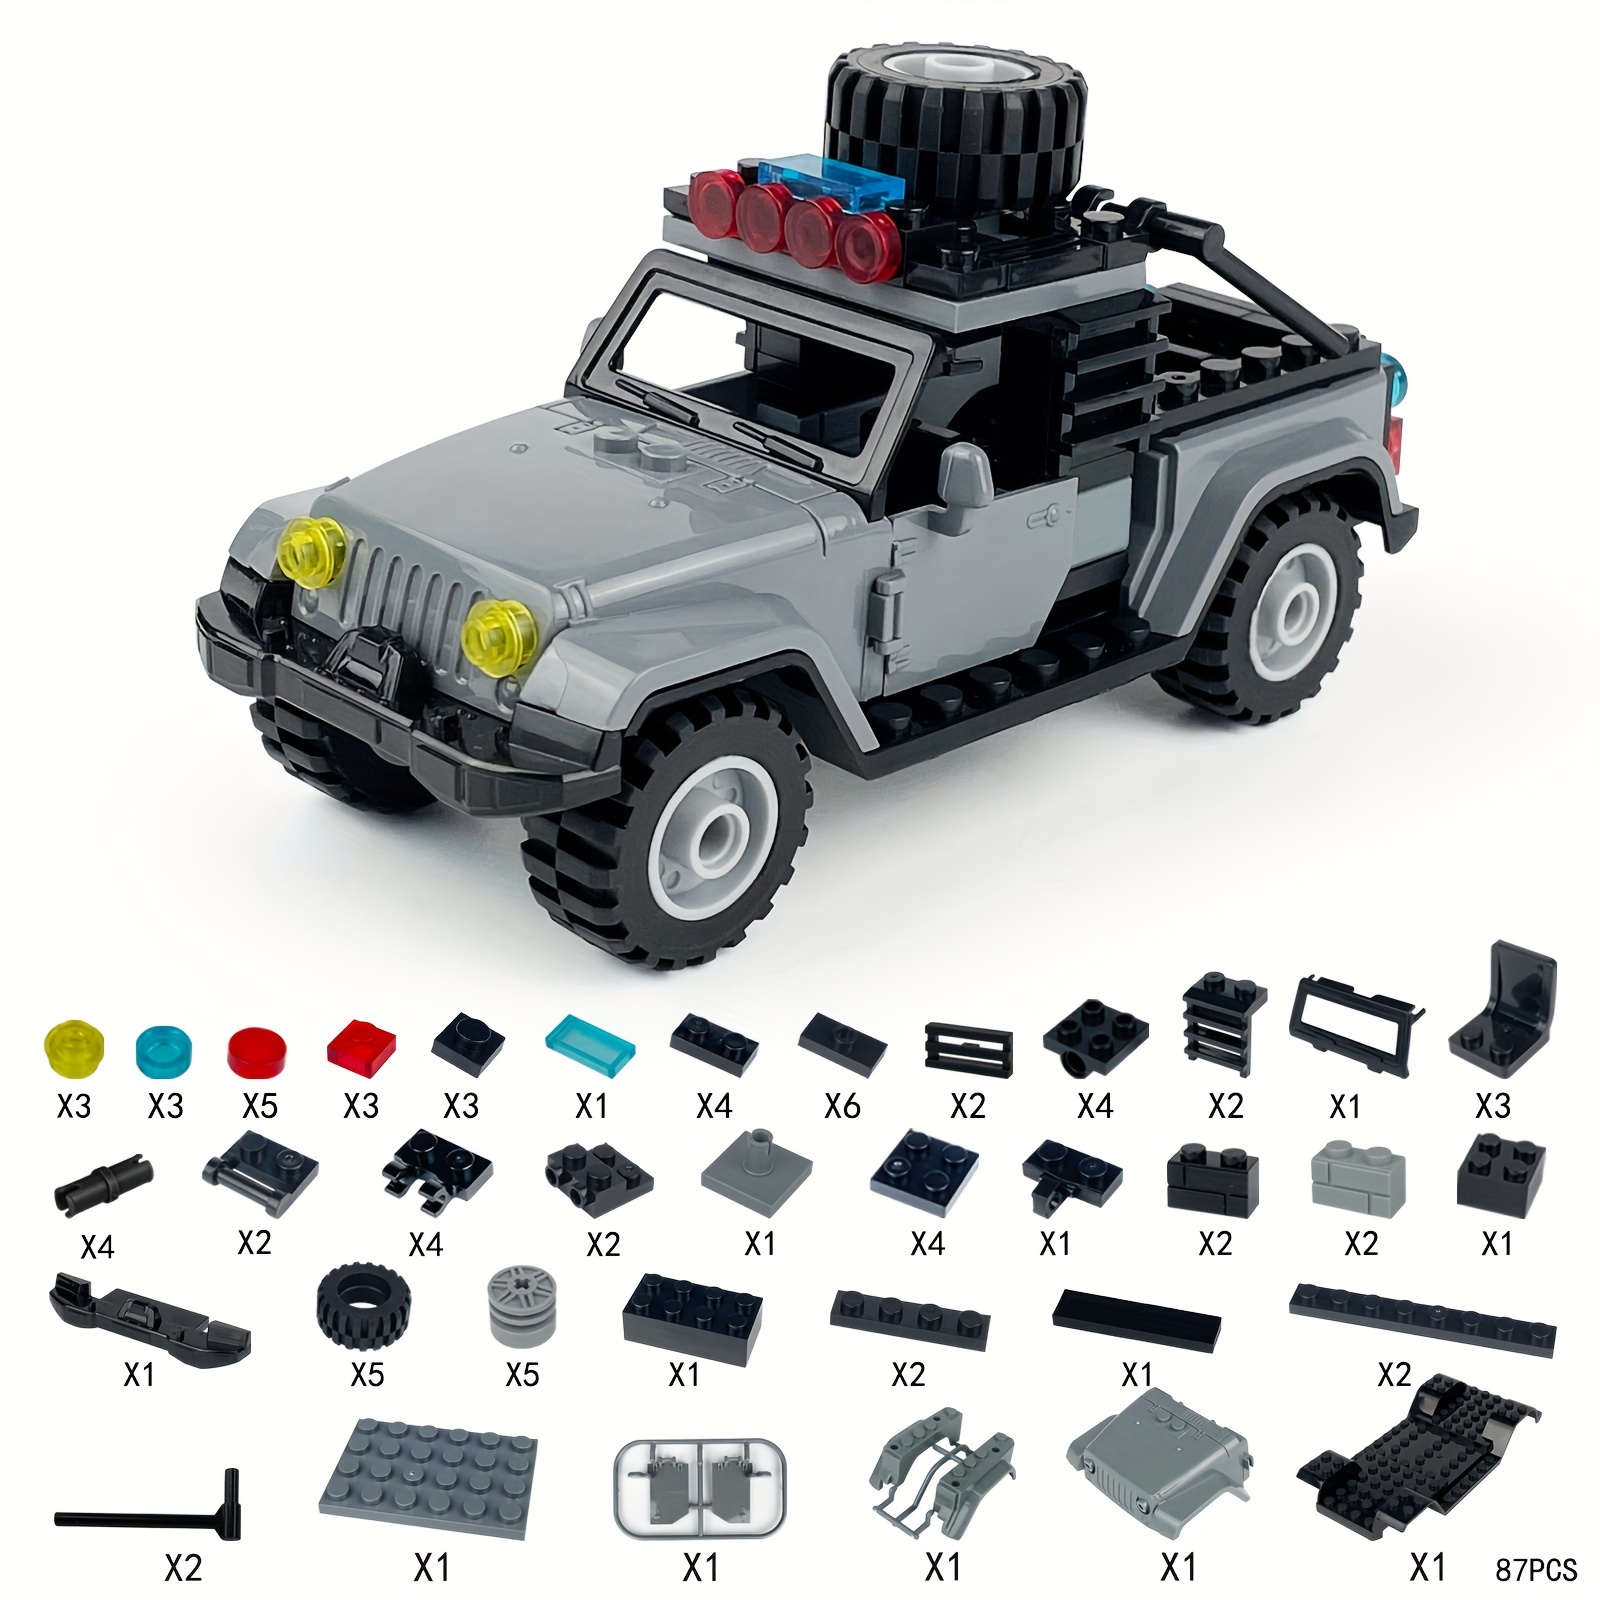 Build Your Own X3 Sports Activity Vehicle